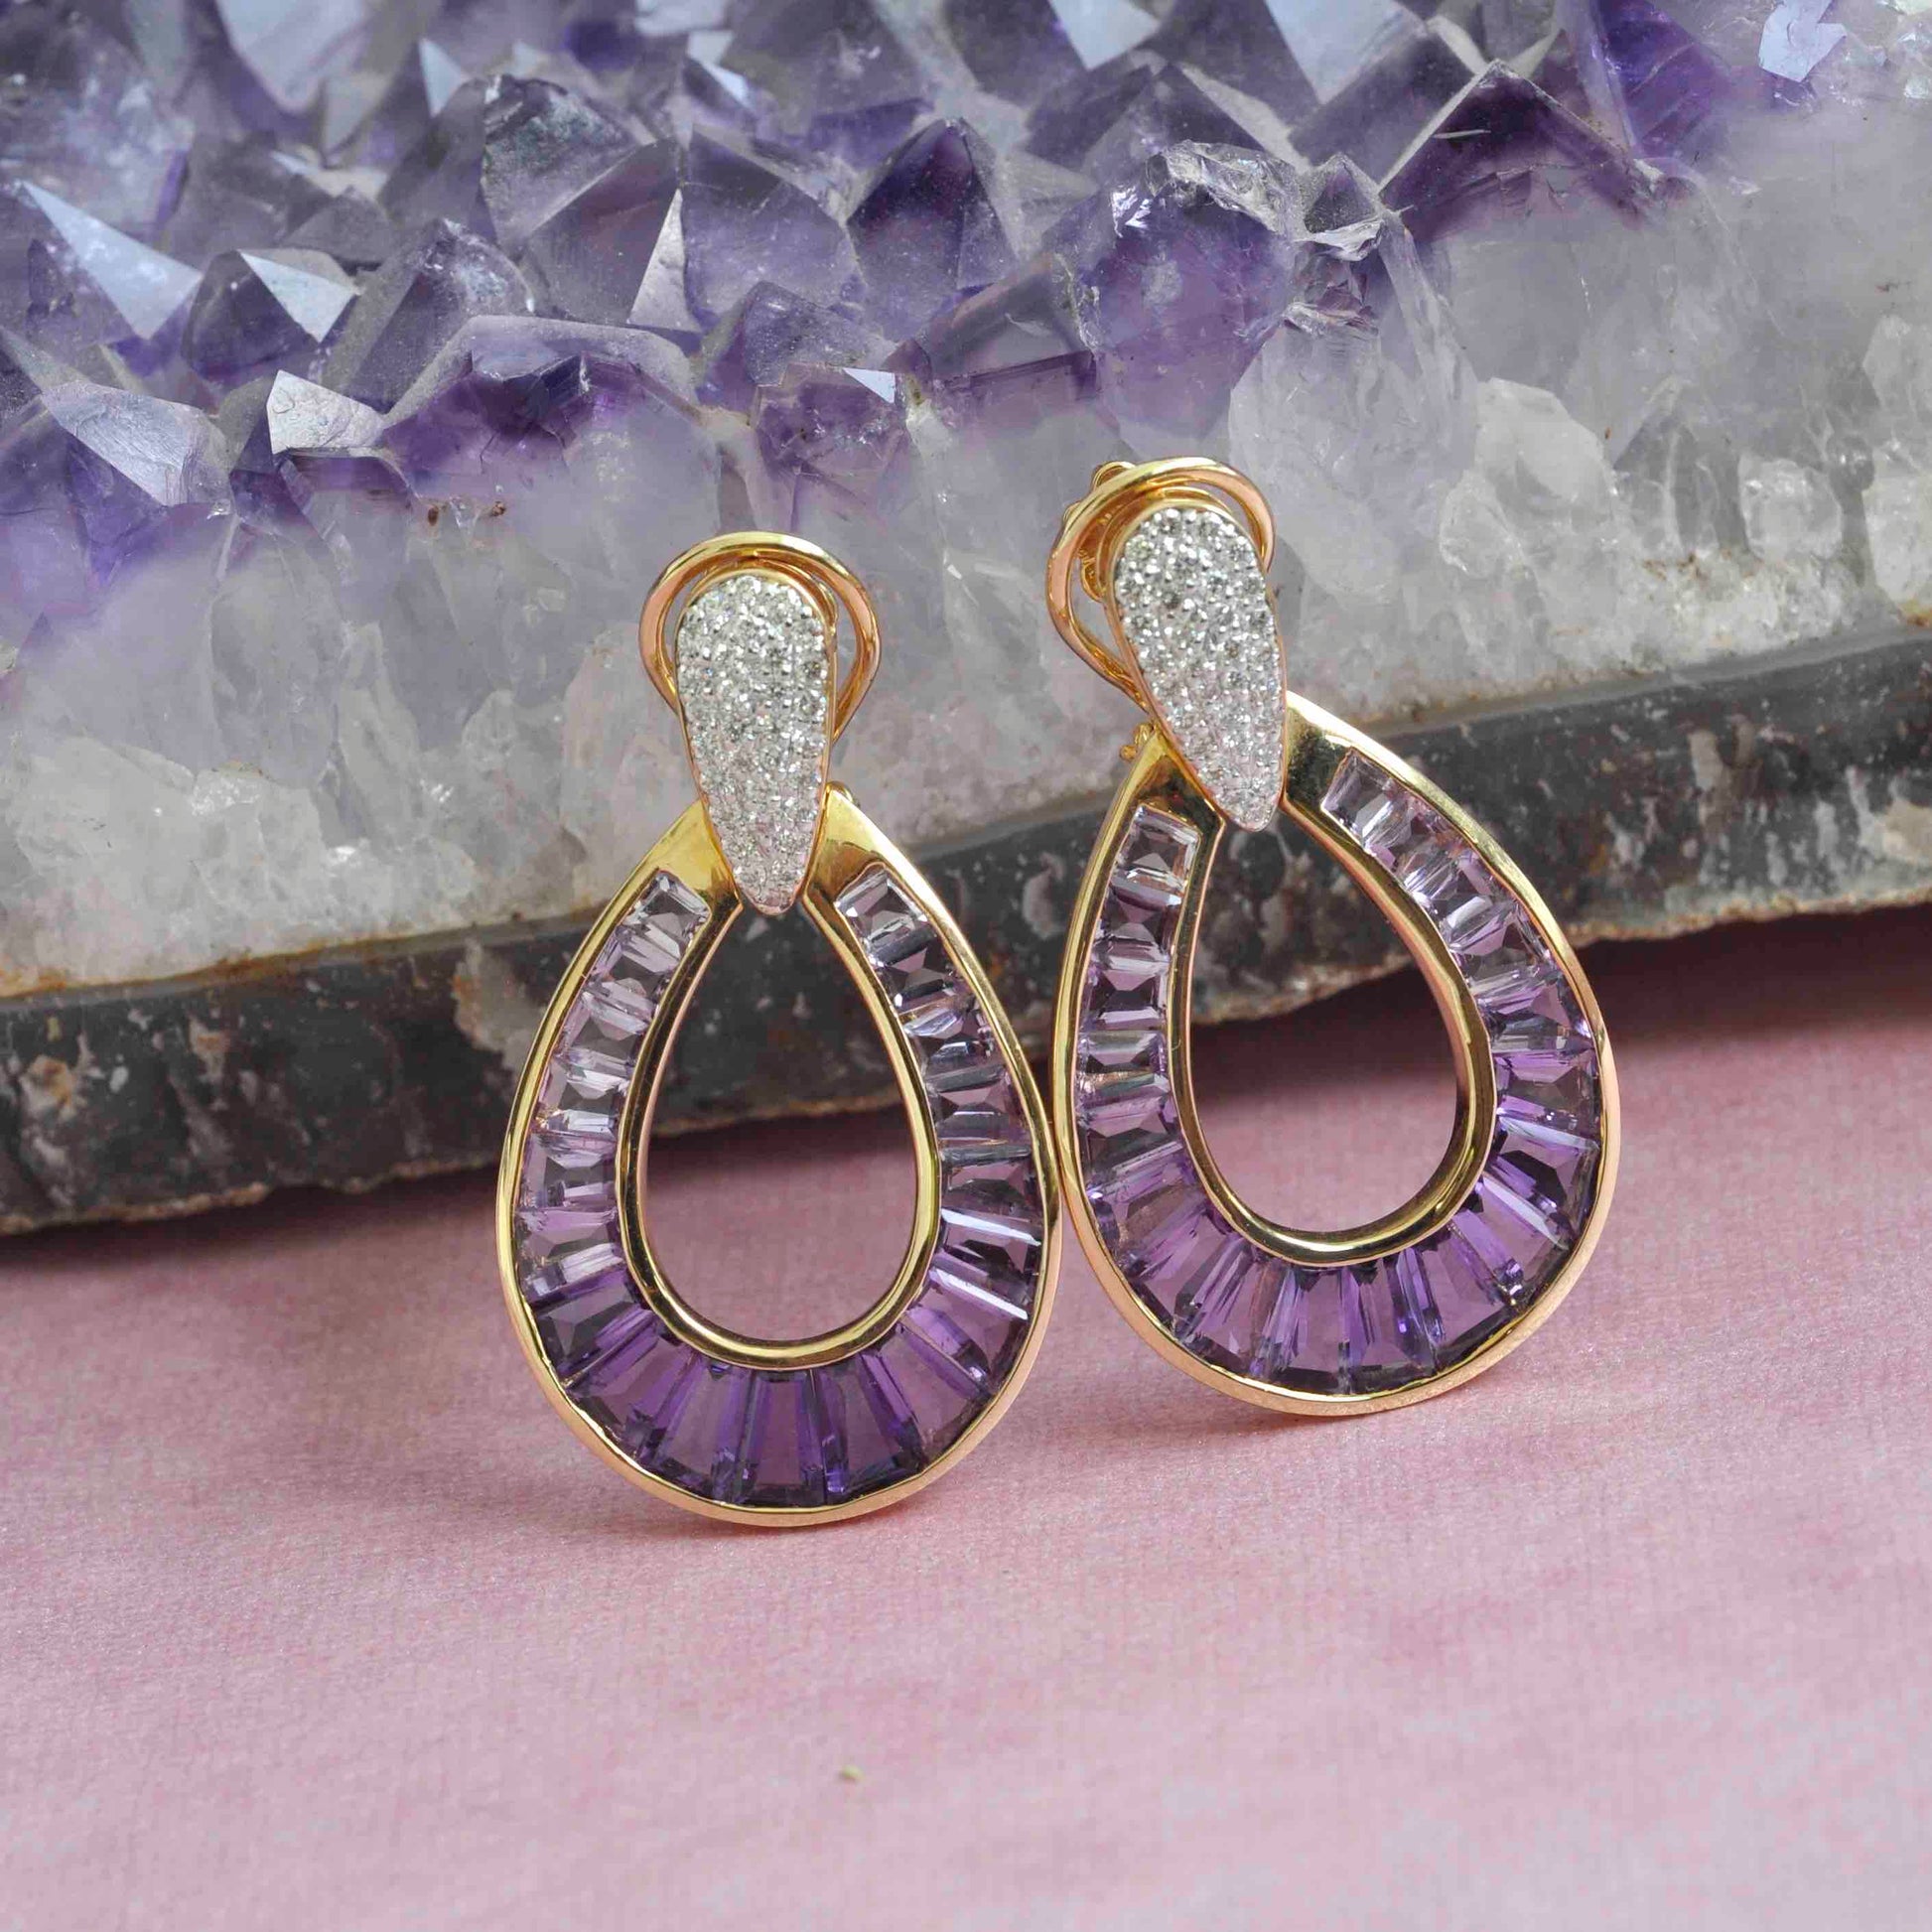 Tapered amethyst jewelry